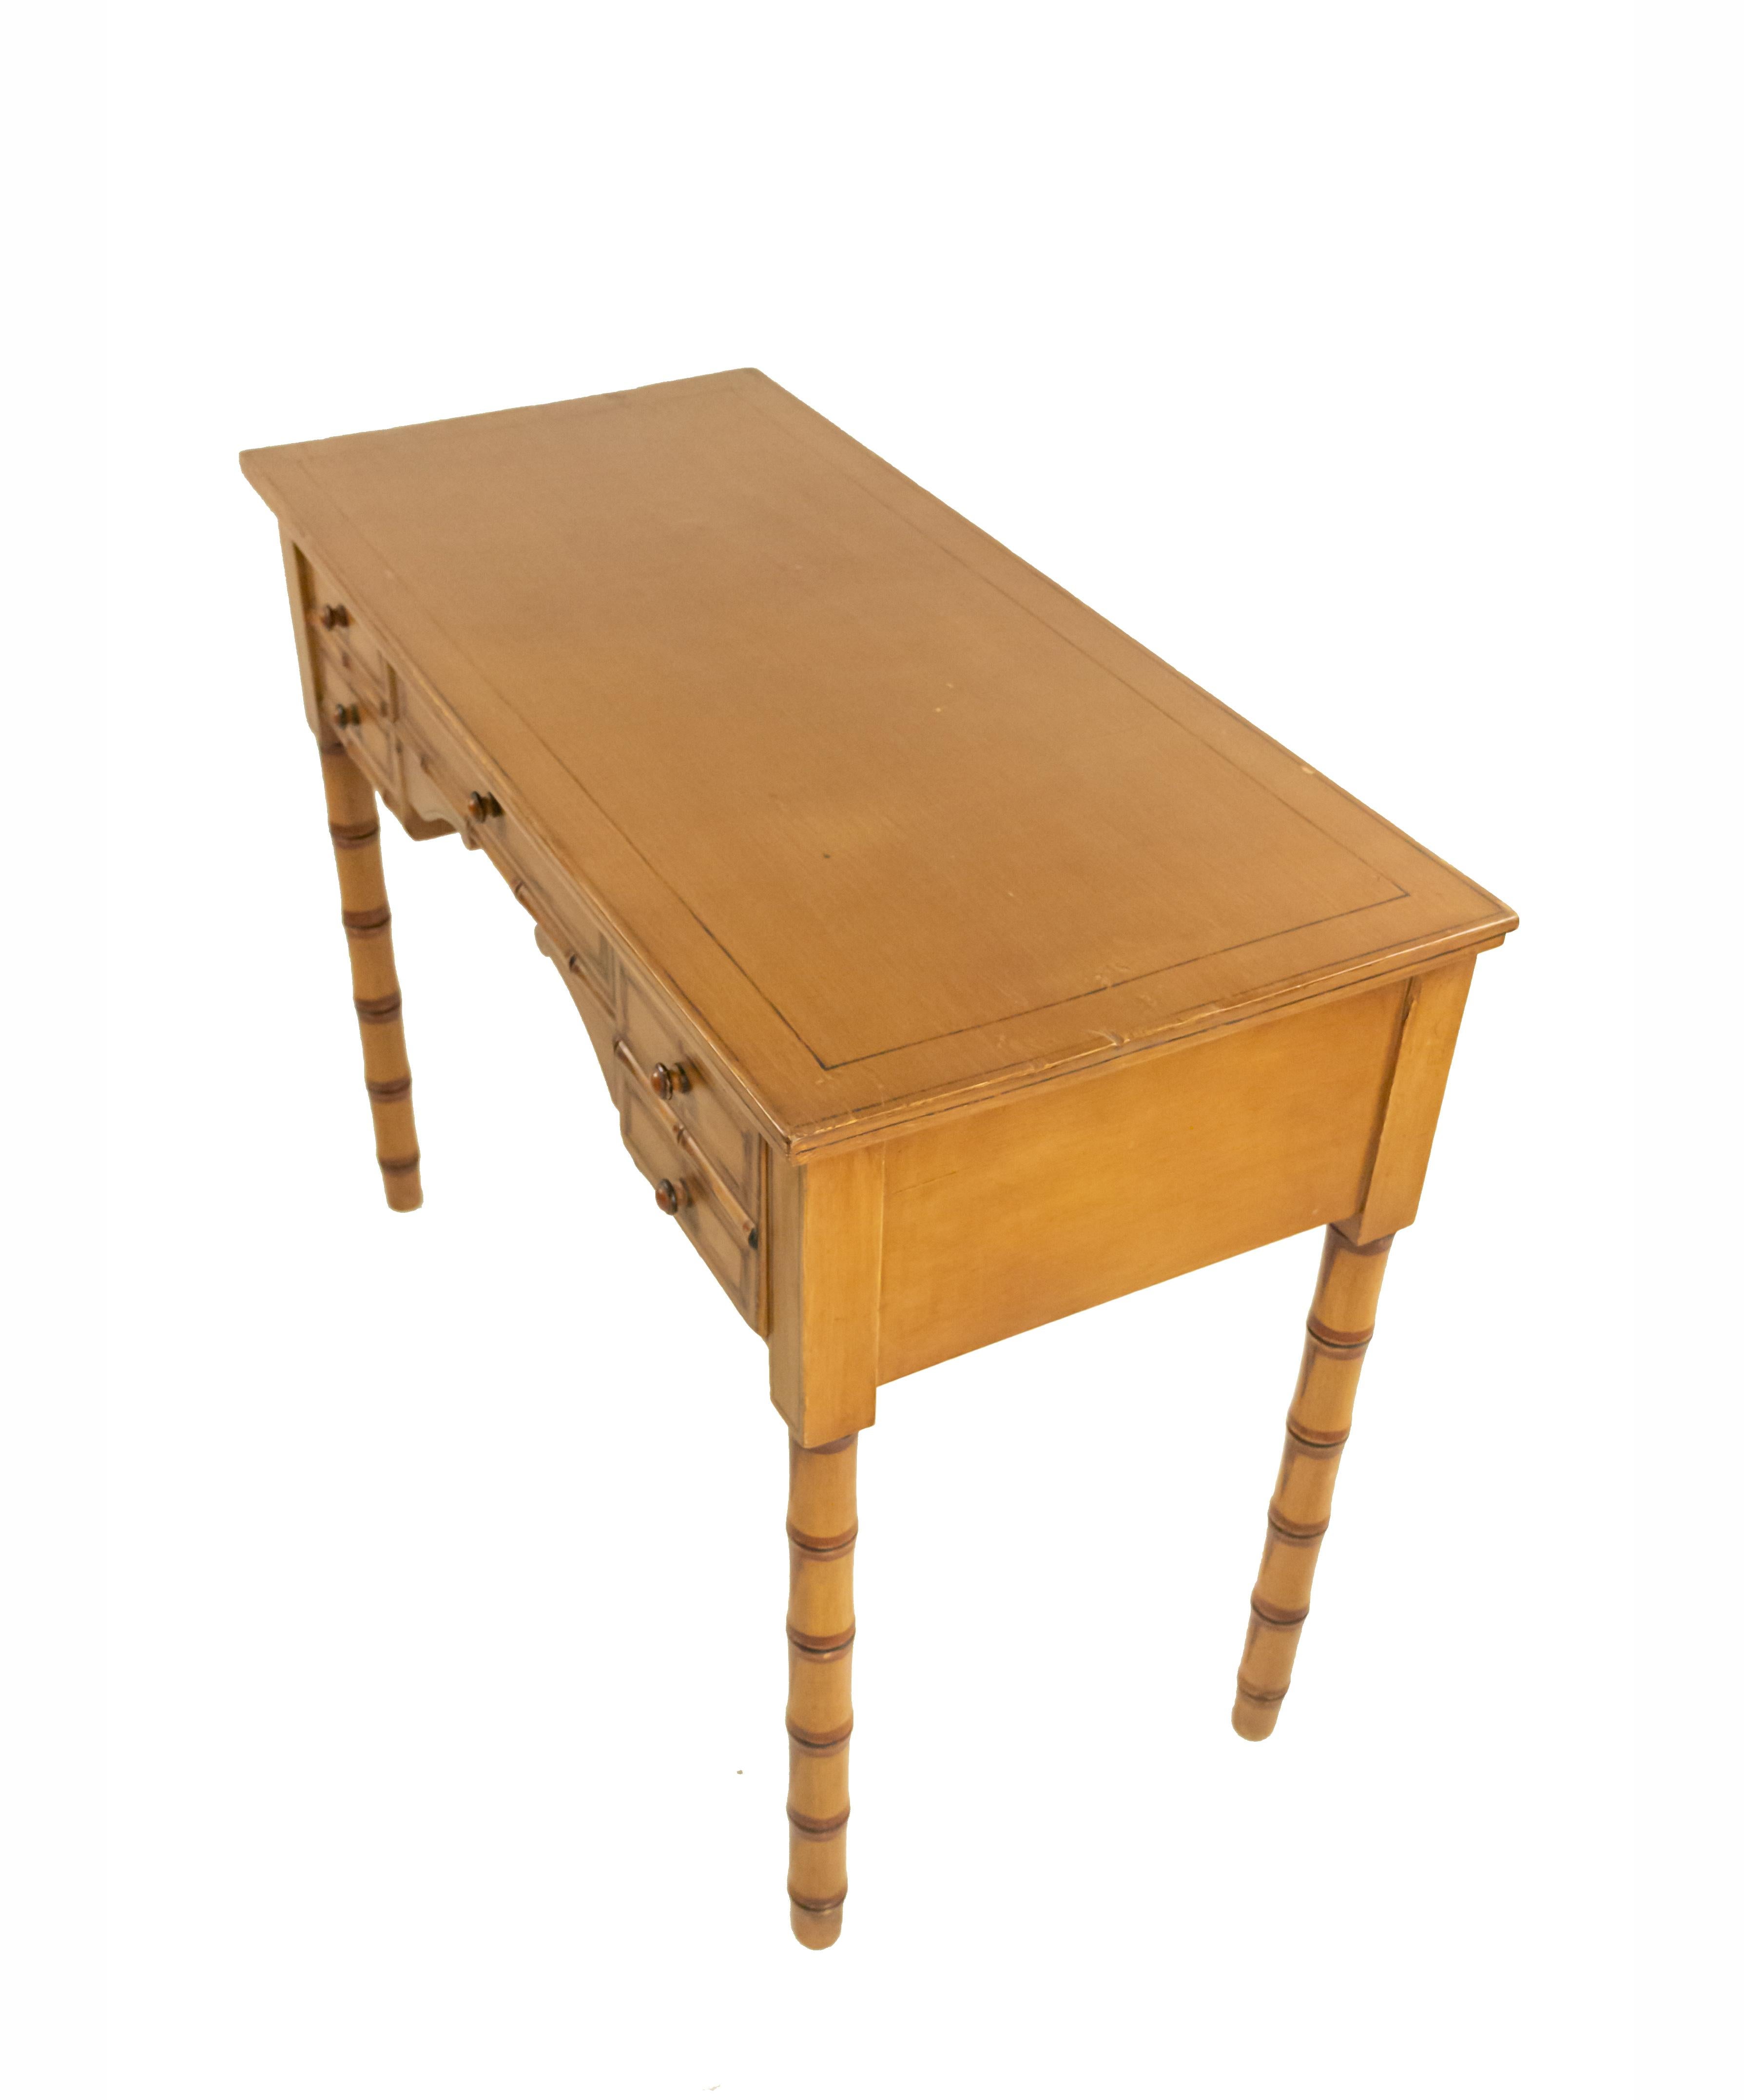 Painted English Regency Style Faux Bamboo Desk